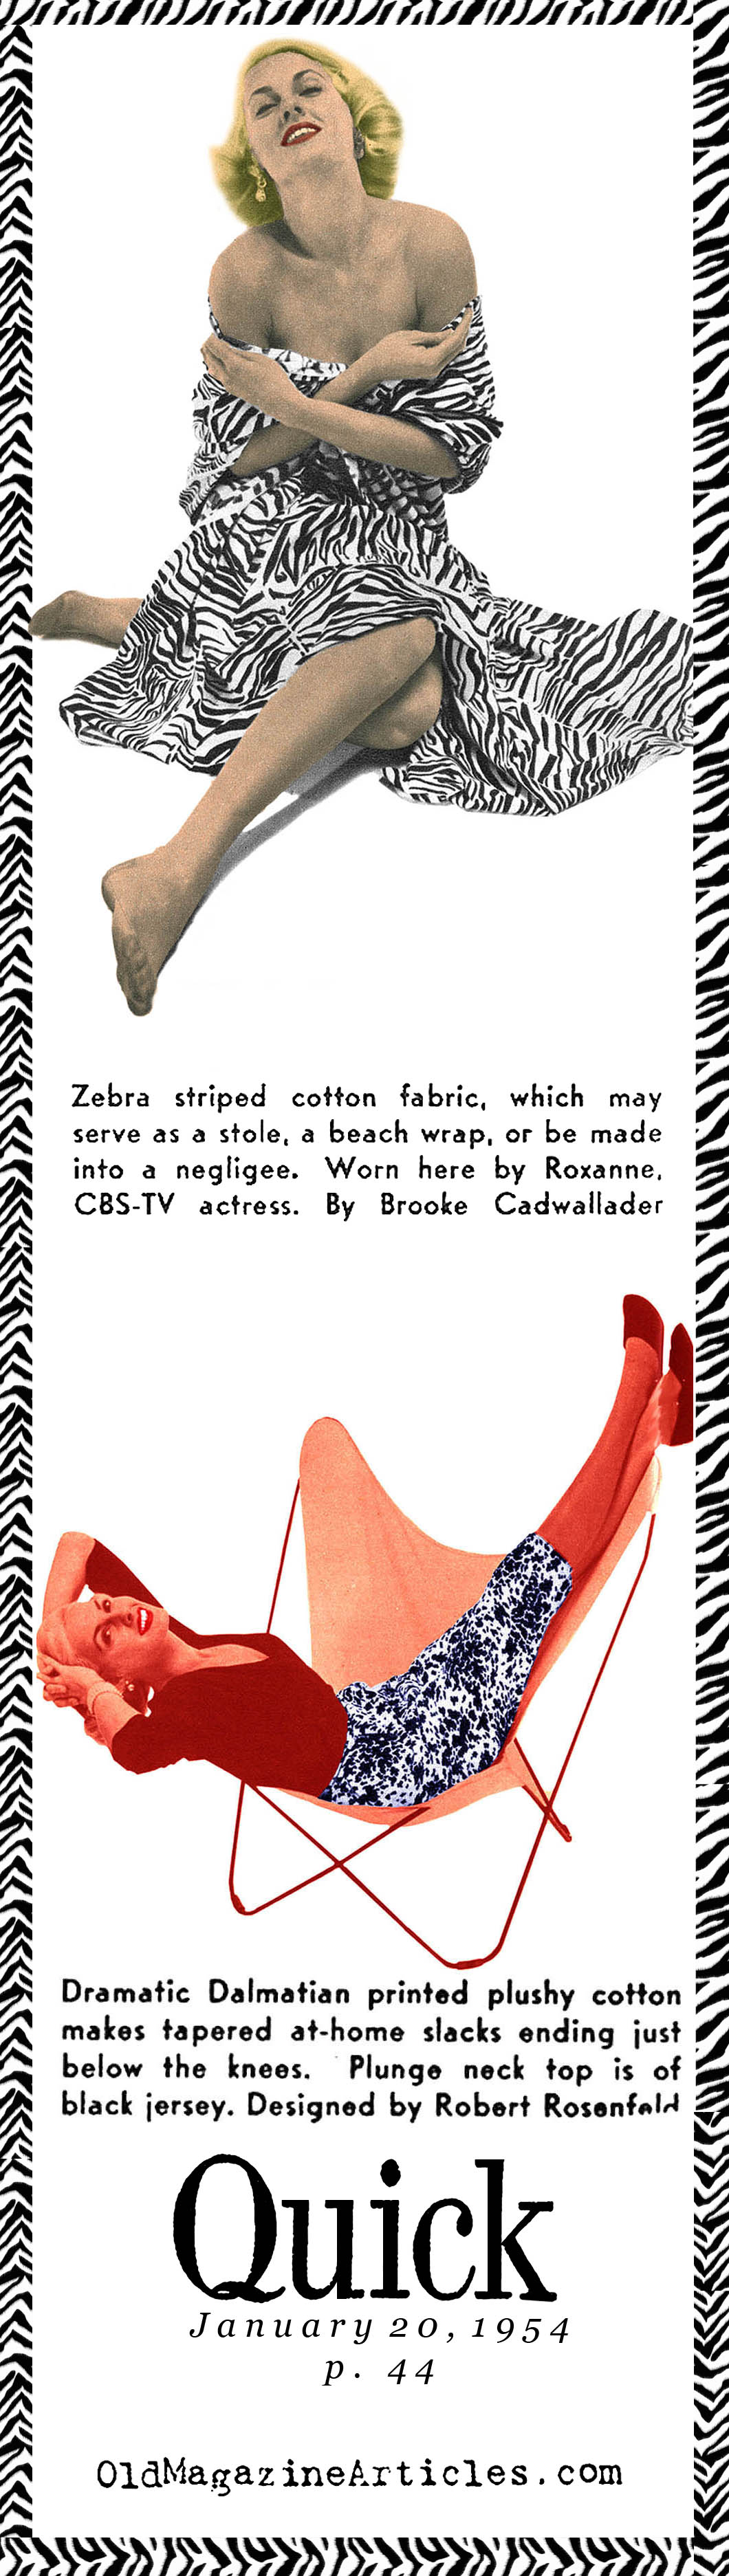 Leopard and Zebra Prints Become the Thing, Again (Quick Magazine, 1954)